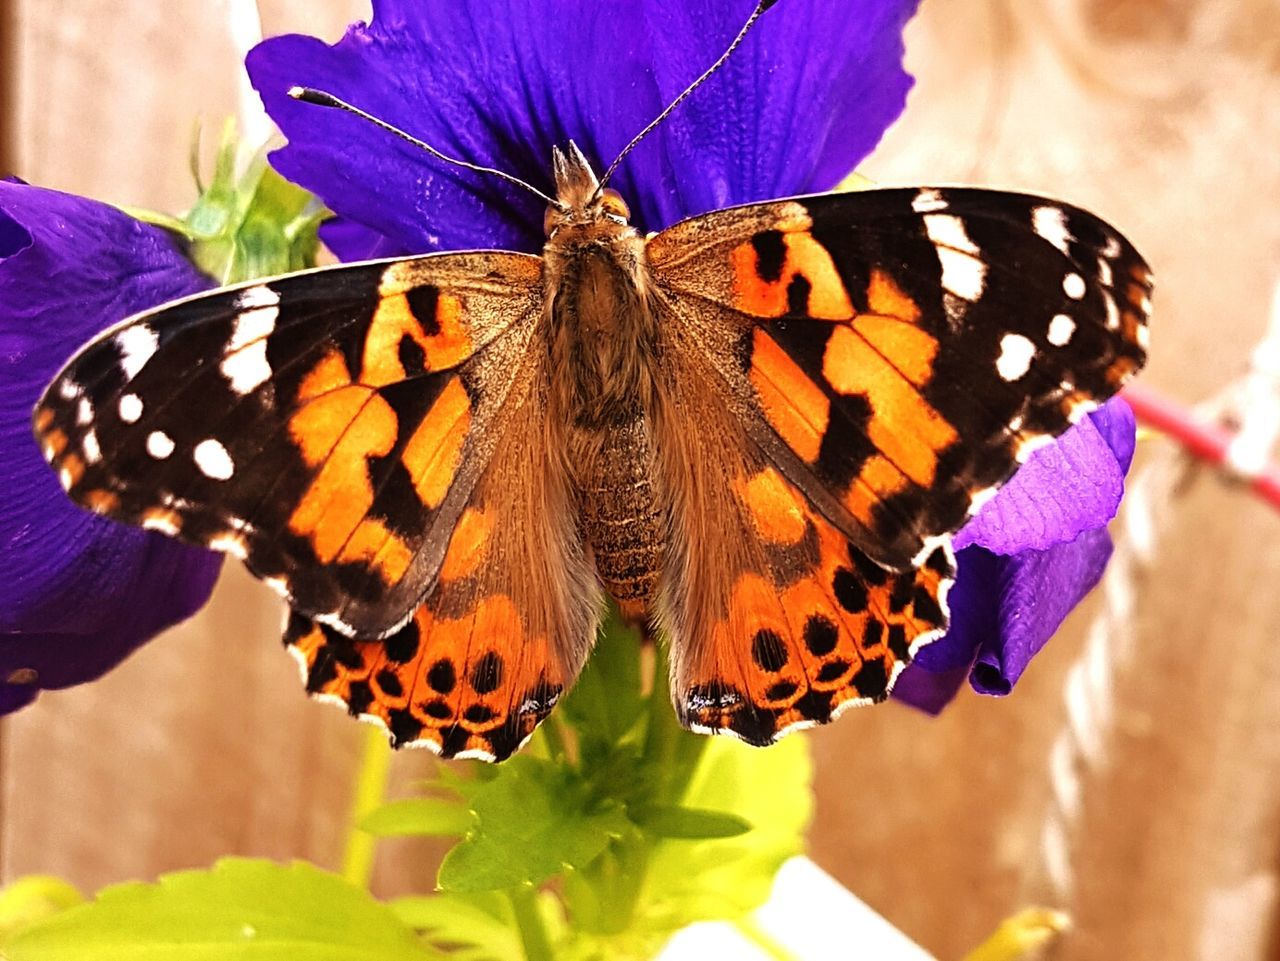 CLOSE-UP OF BUTTERFLY ON FLOWERS